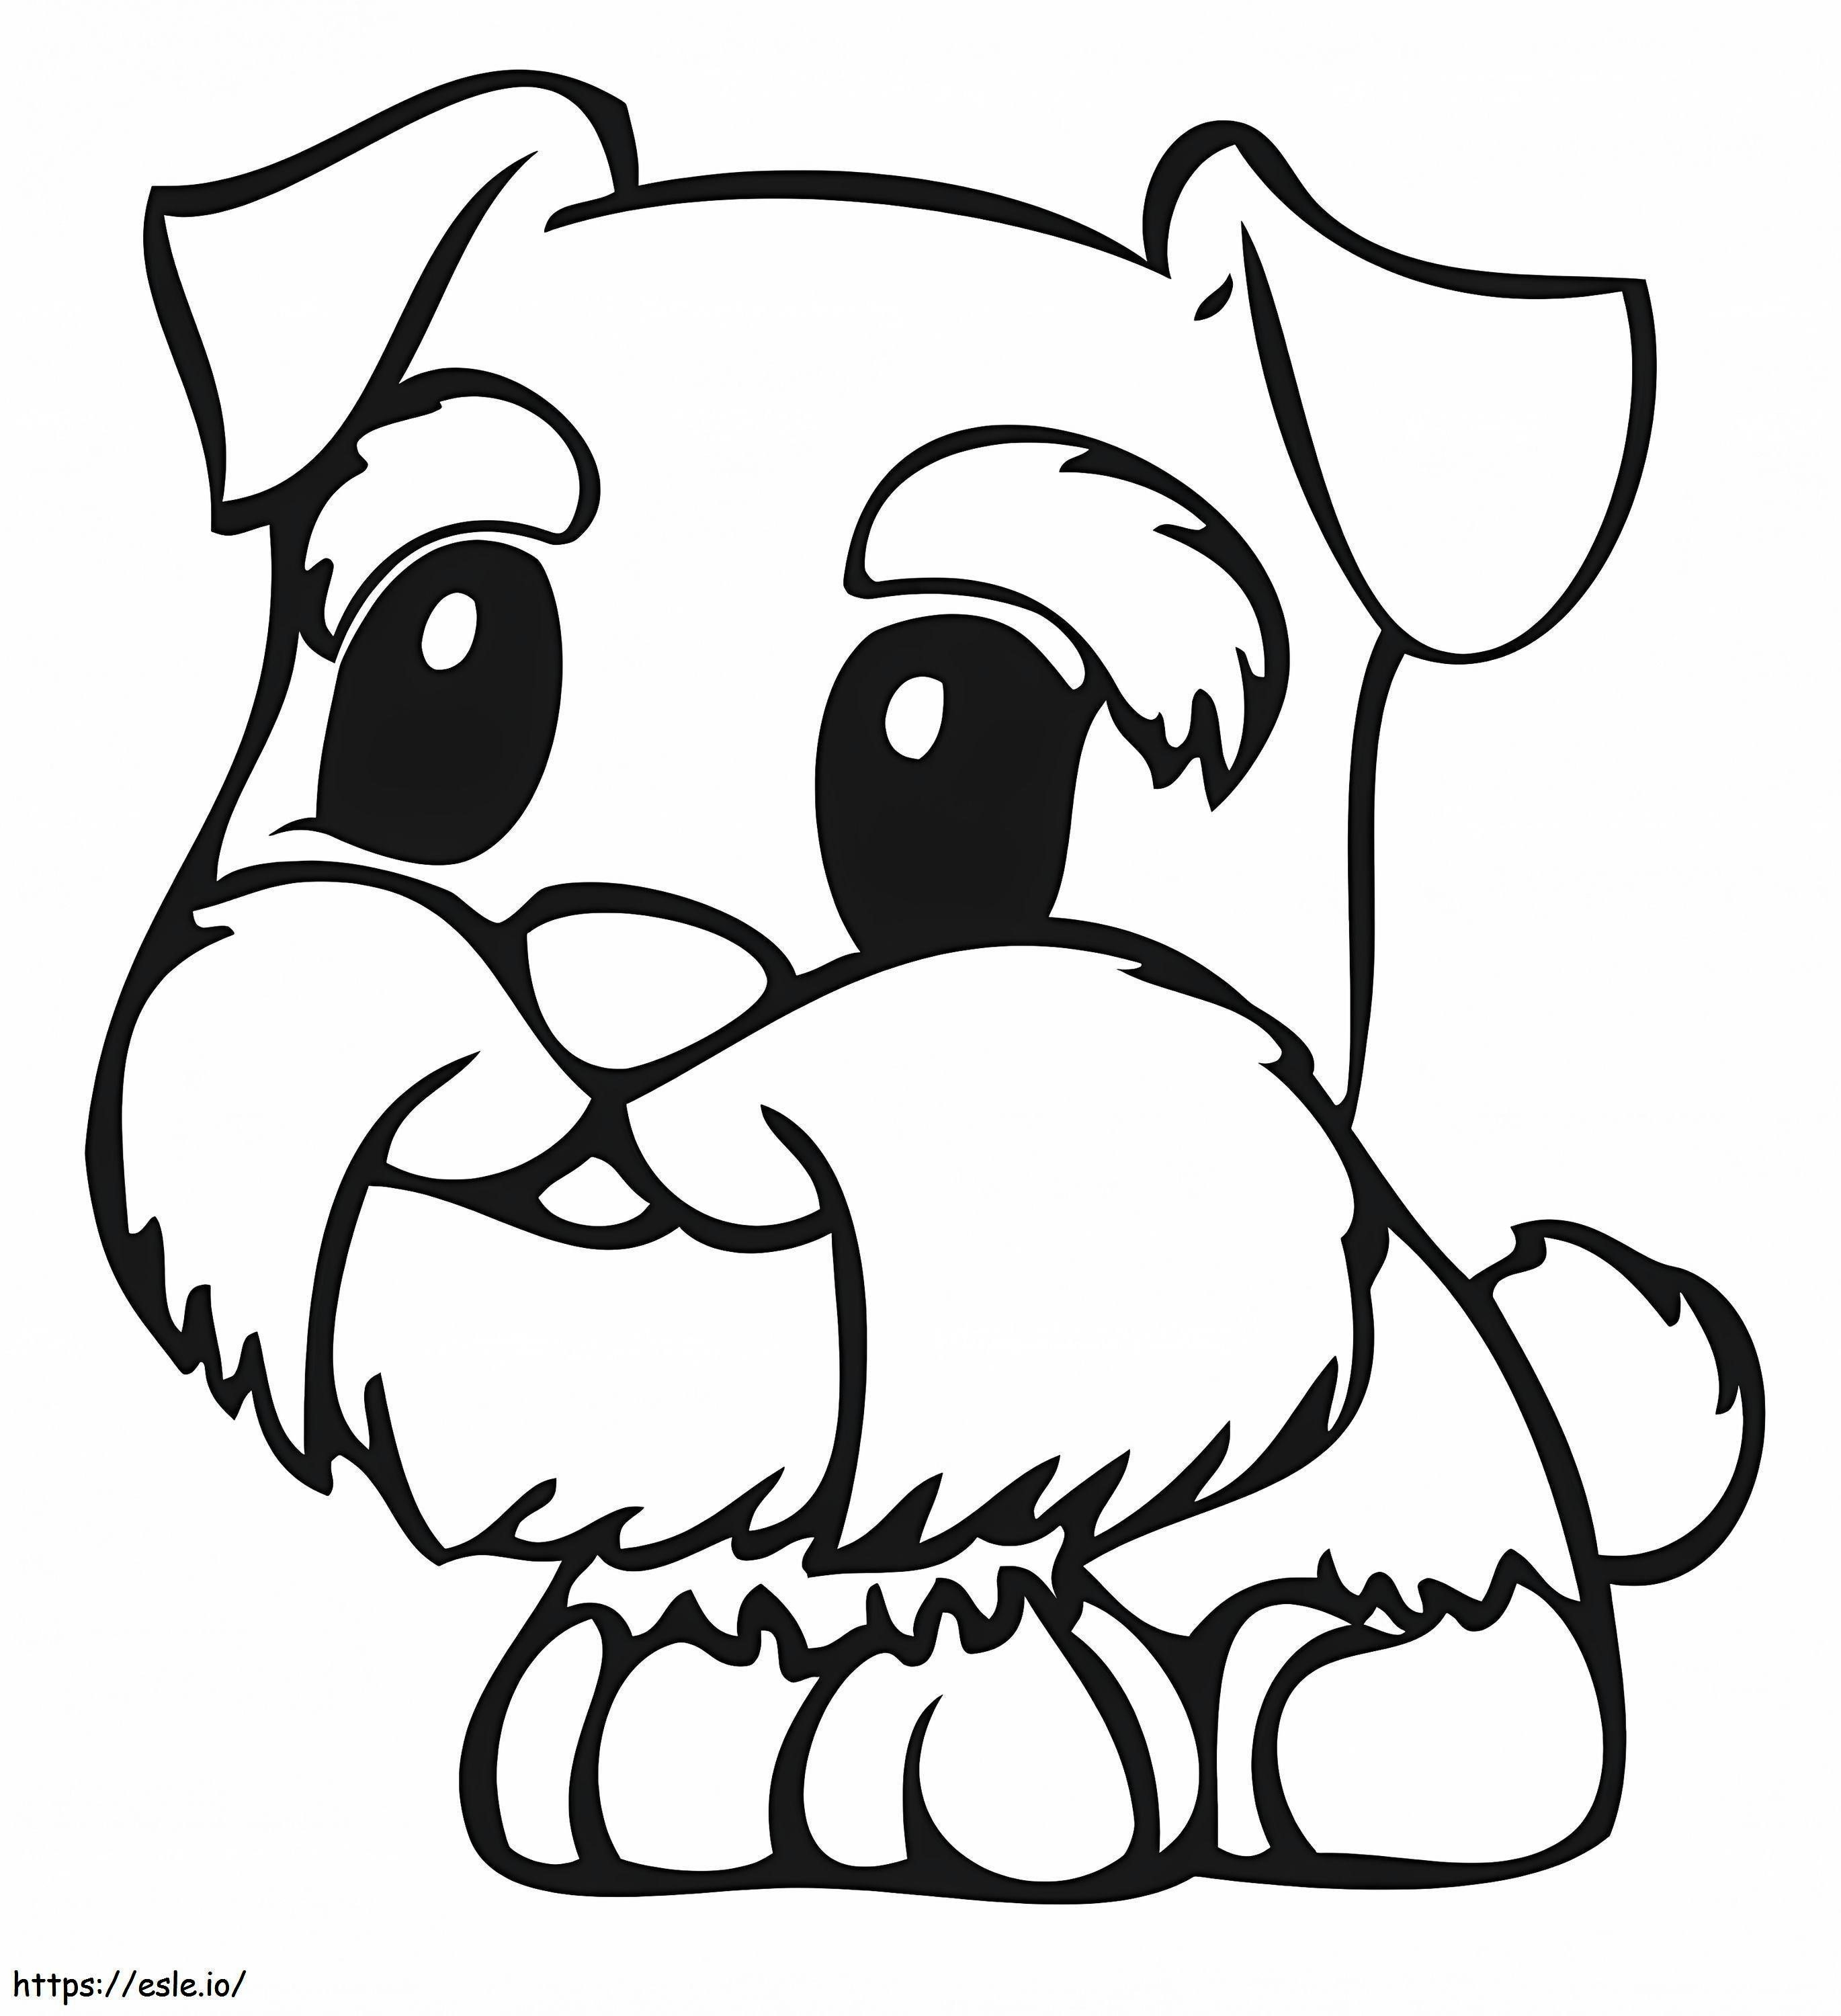 Free Squinkies coloring page